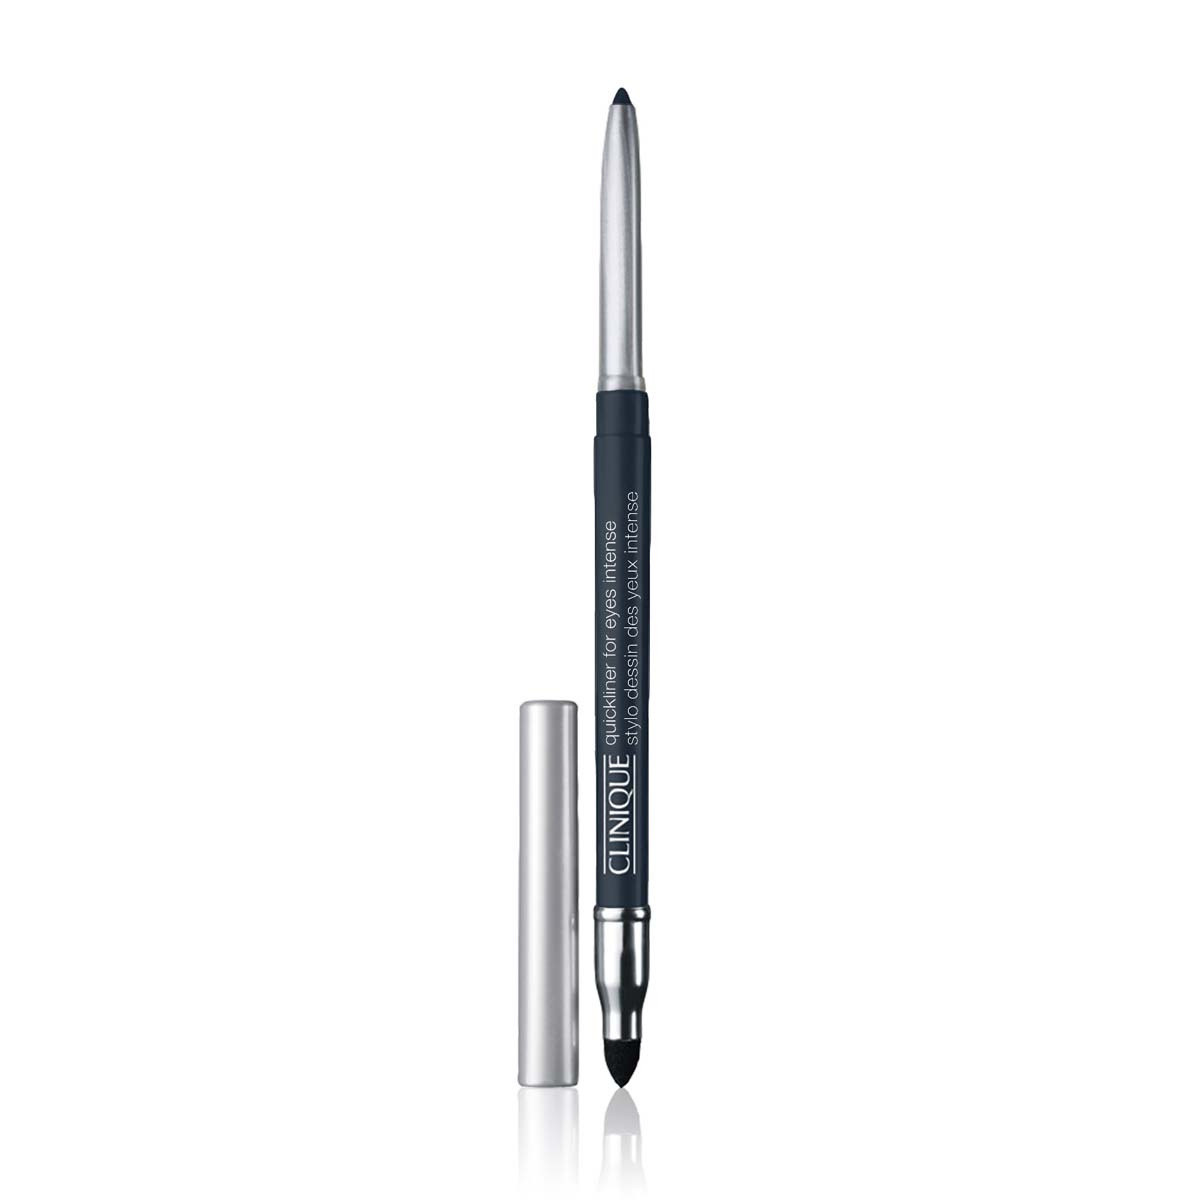 Clinique quickliner for eyes intense - 08 intense midnight, 08 INTENSE MIDNIGHT, large image number 0